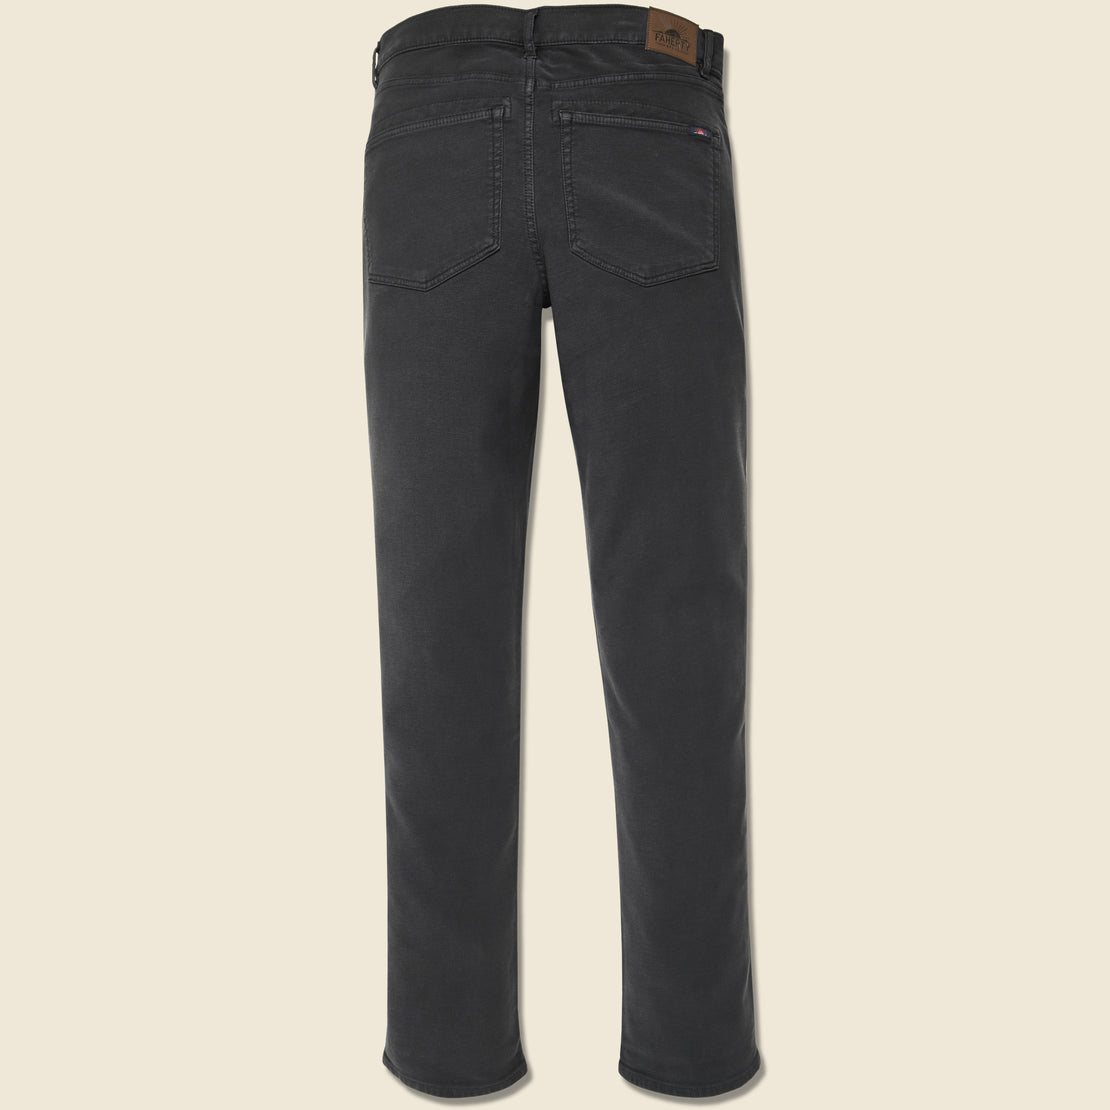 Stretch Terry Pant - Onyx Black - Faherty - STAG Provisions - Pants - Twill